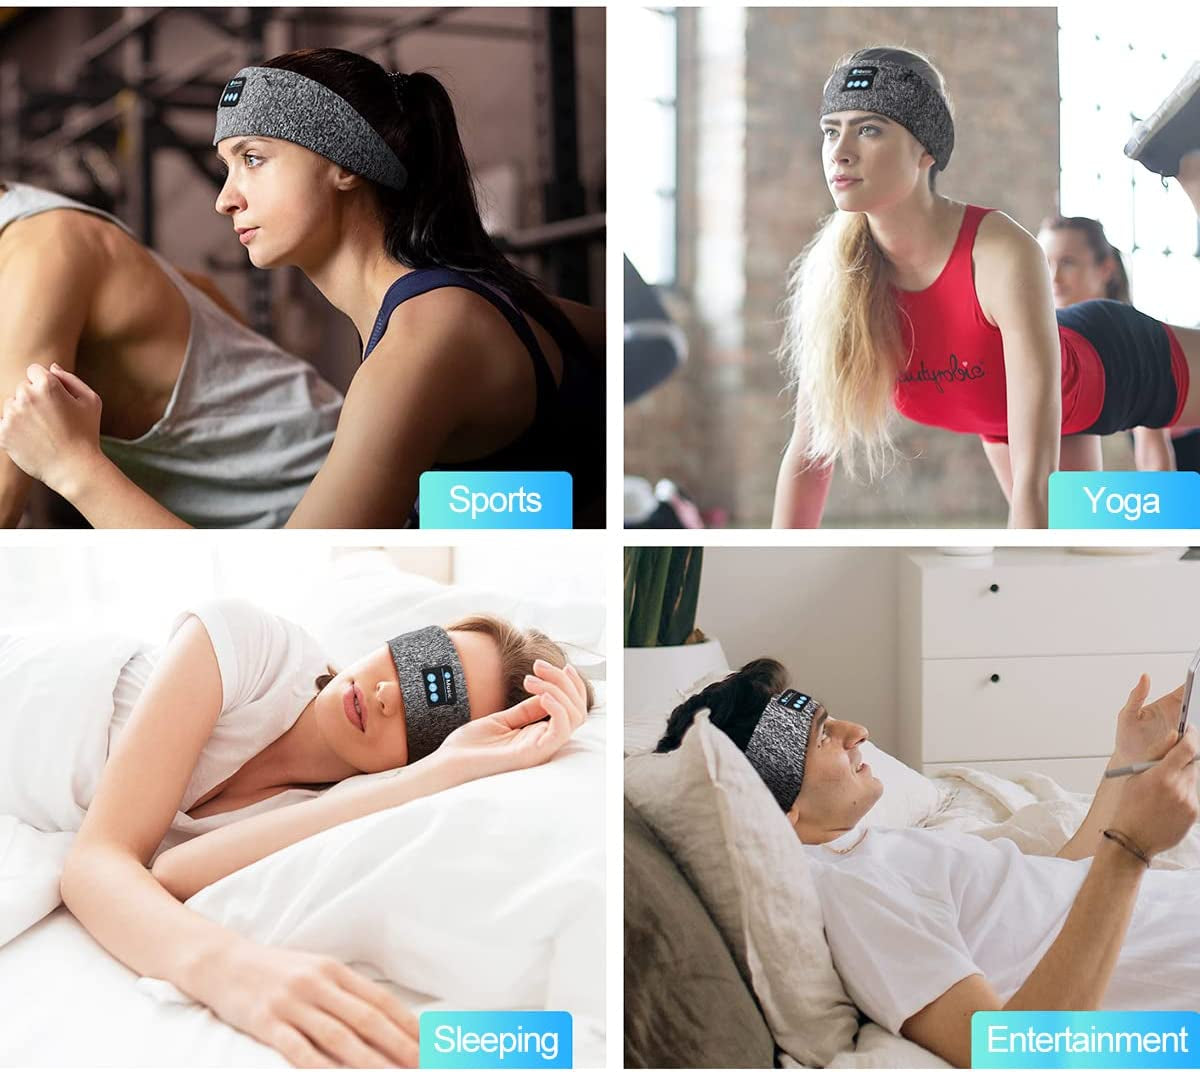 Sleep Headphones Wireless Headband Sports Earphones, Bluetooth Music Earbuds Soft Sleeping Mask Headsets with Ultra-Thin HD Stereo Speaker Perfect for Workout/Yoga/Running/Air Travel/Meditation